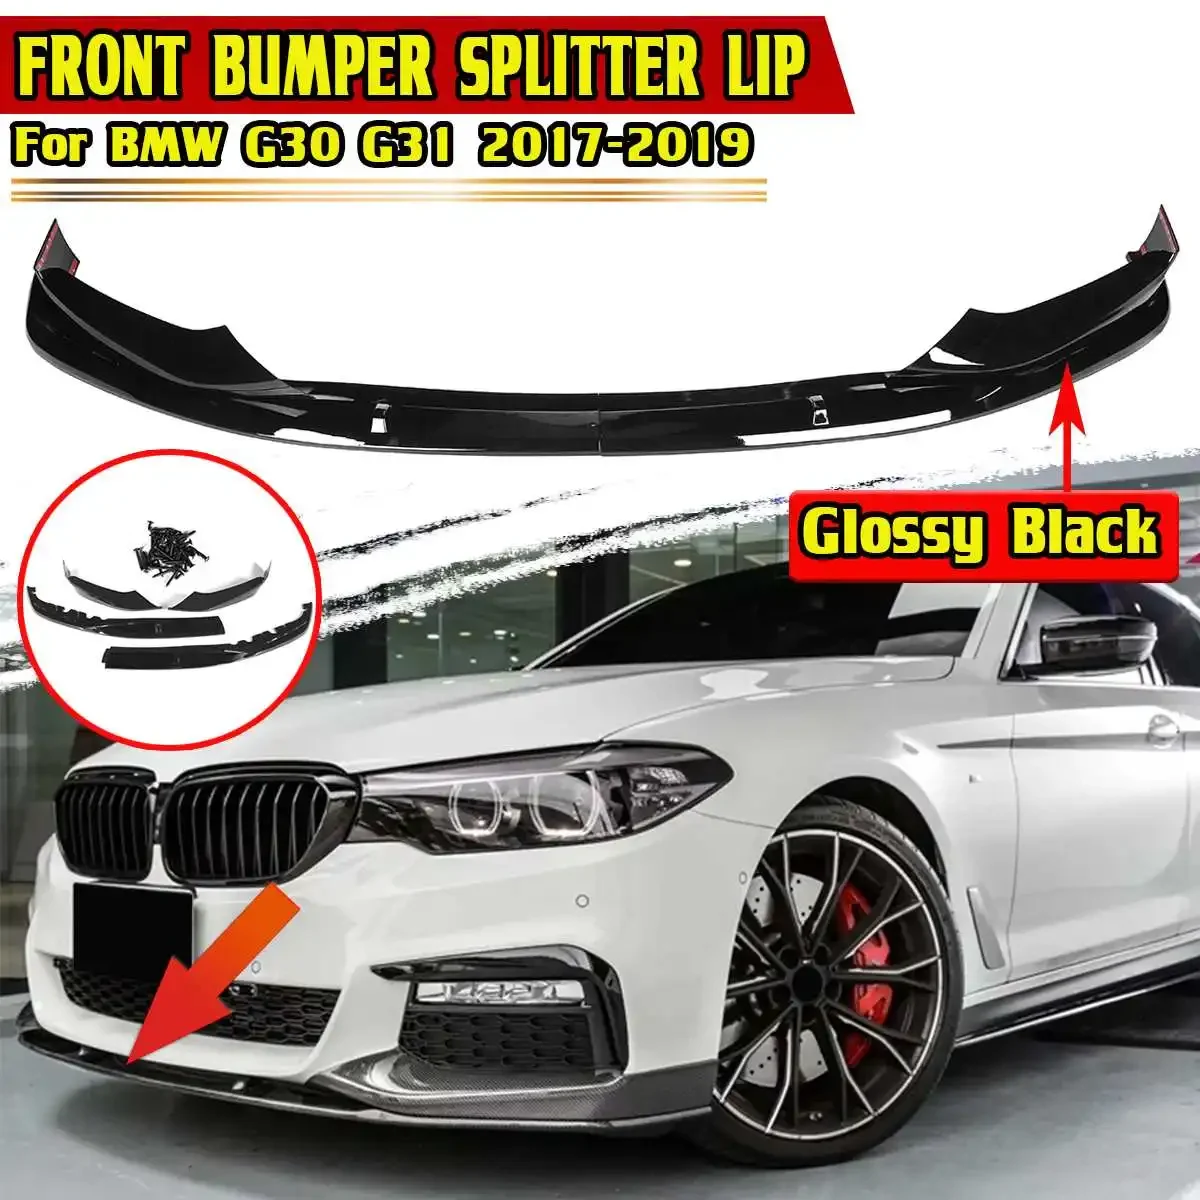 

High Quality G30 Car Front Bumper Lip Splitter Spolier Body Kit Winglet Aprons Guard Covers For BMW G30 G31 M Sport 2017-2019